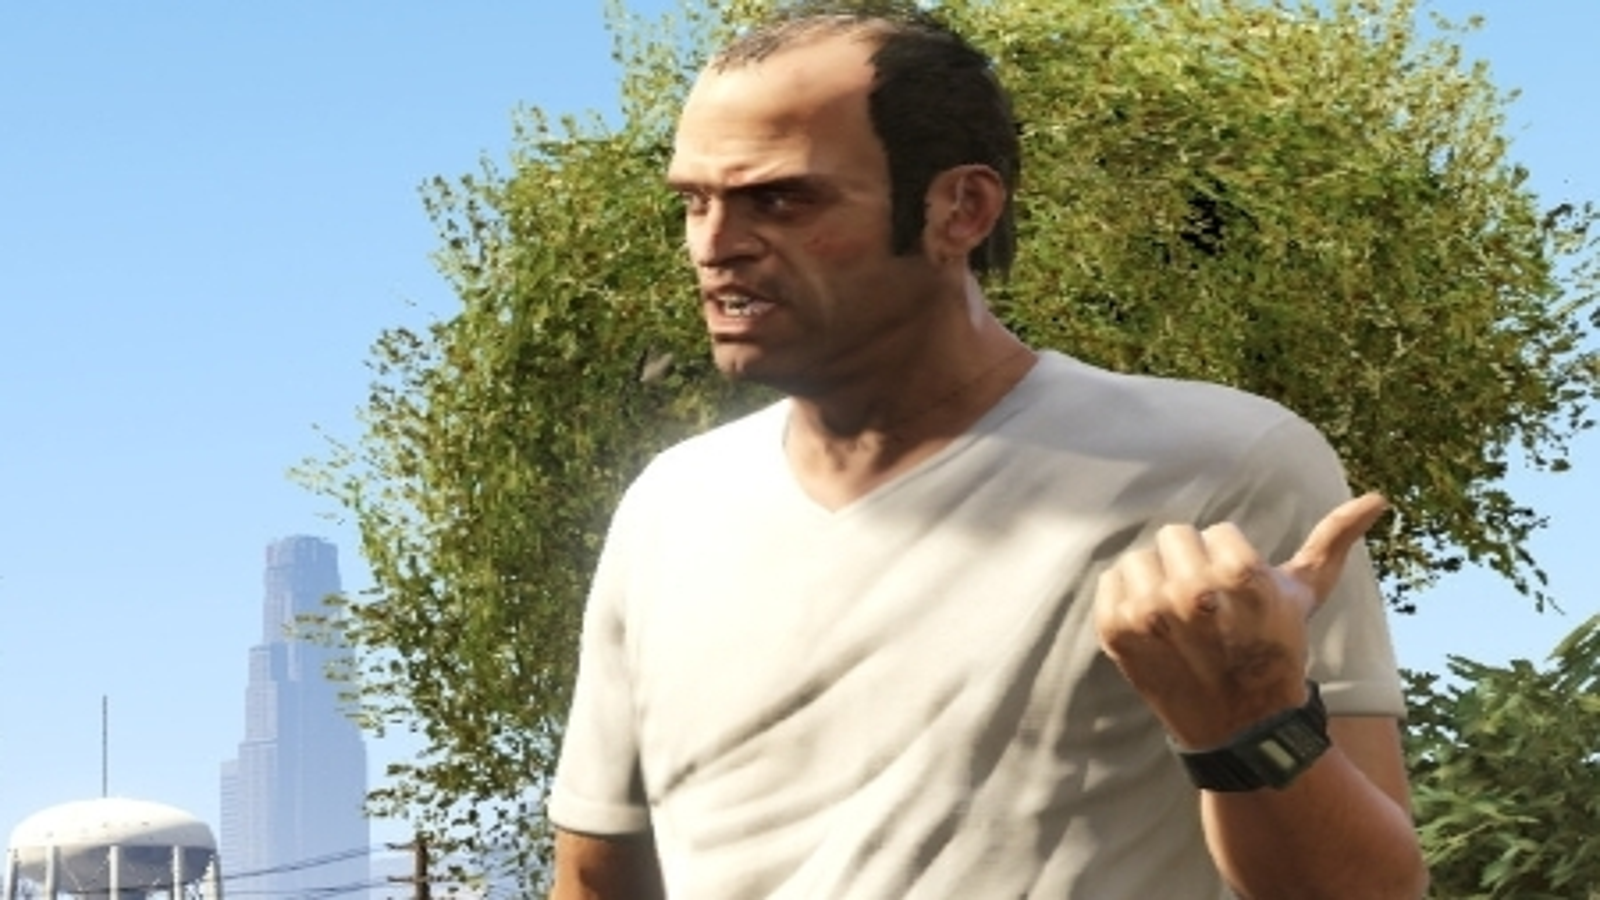 GTA 5 writer explains the decision to develop for current gen consoles -  Polygon